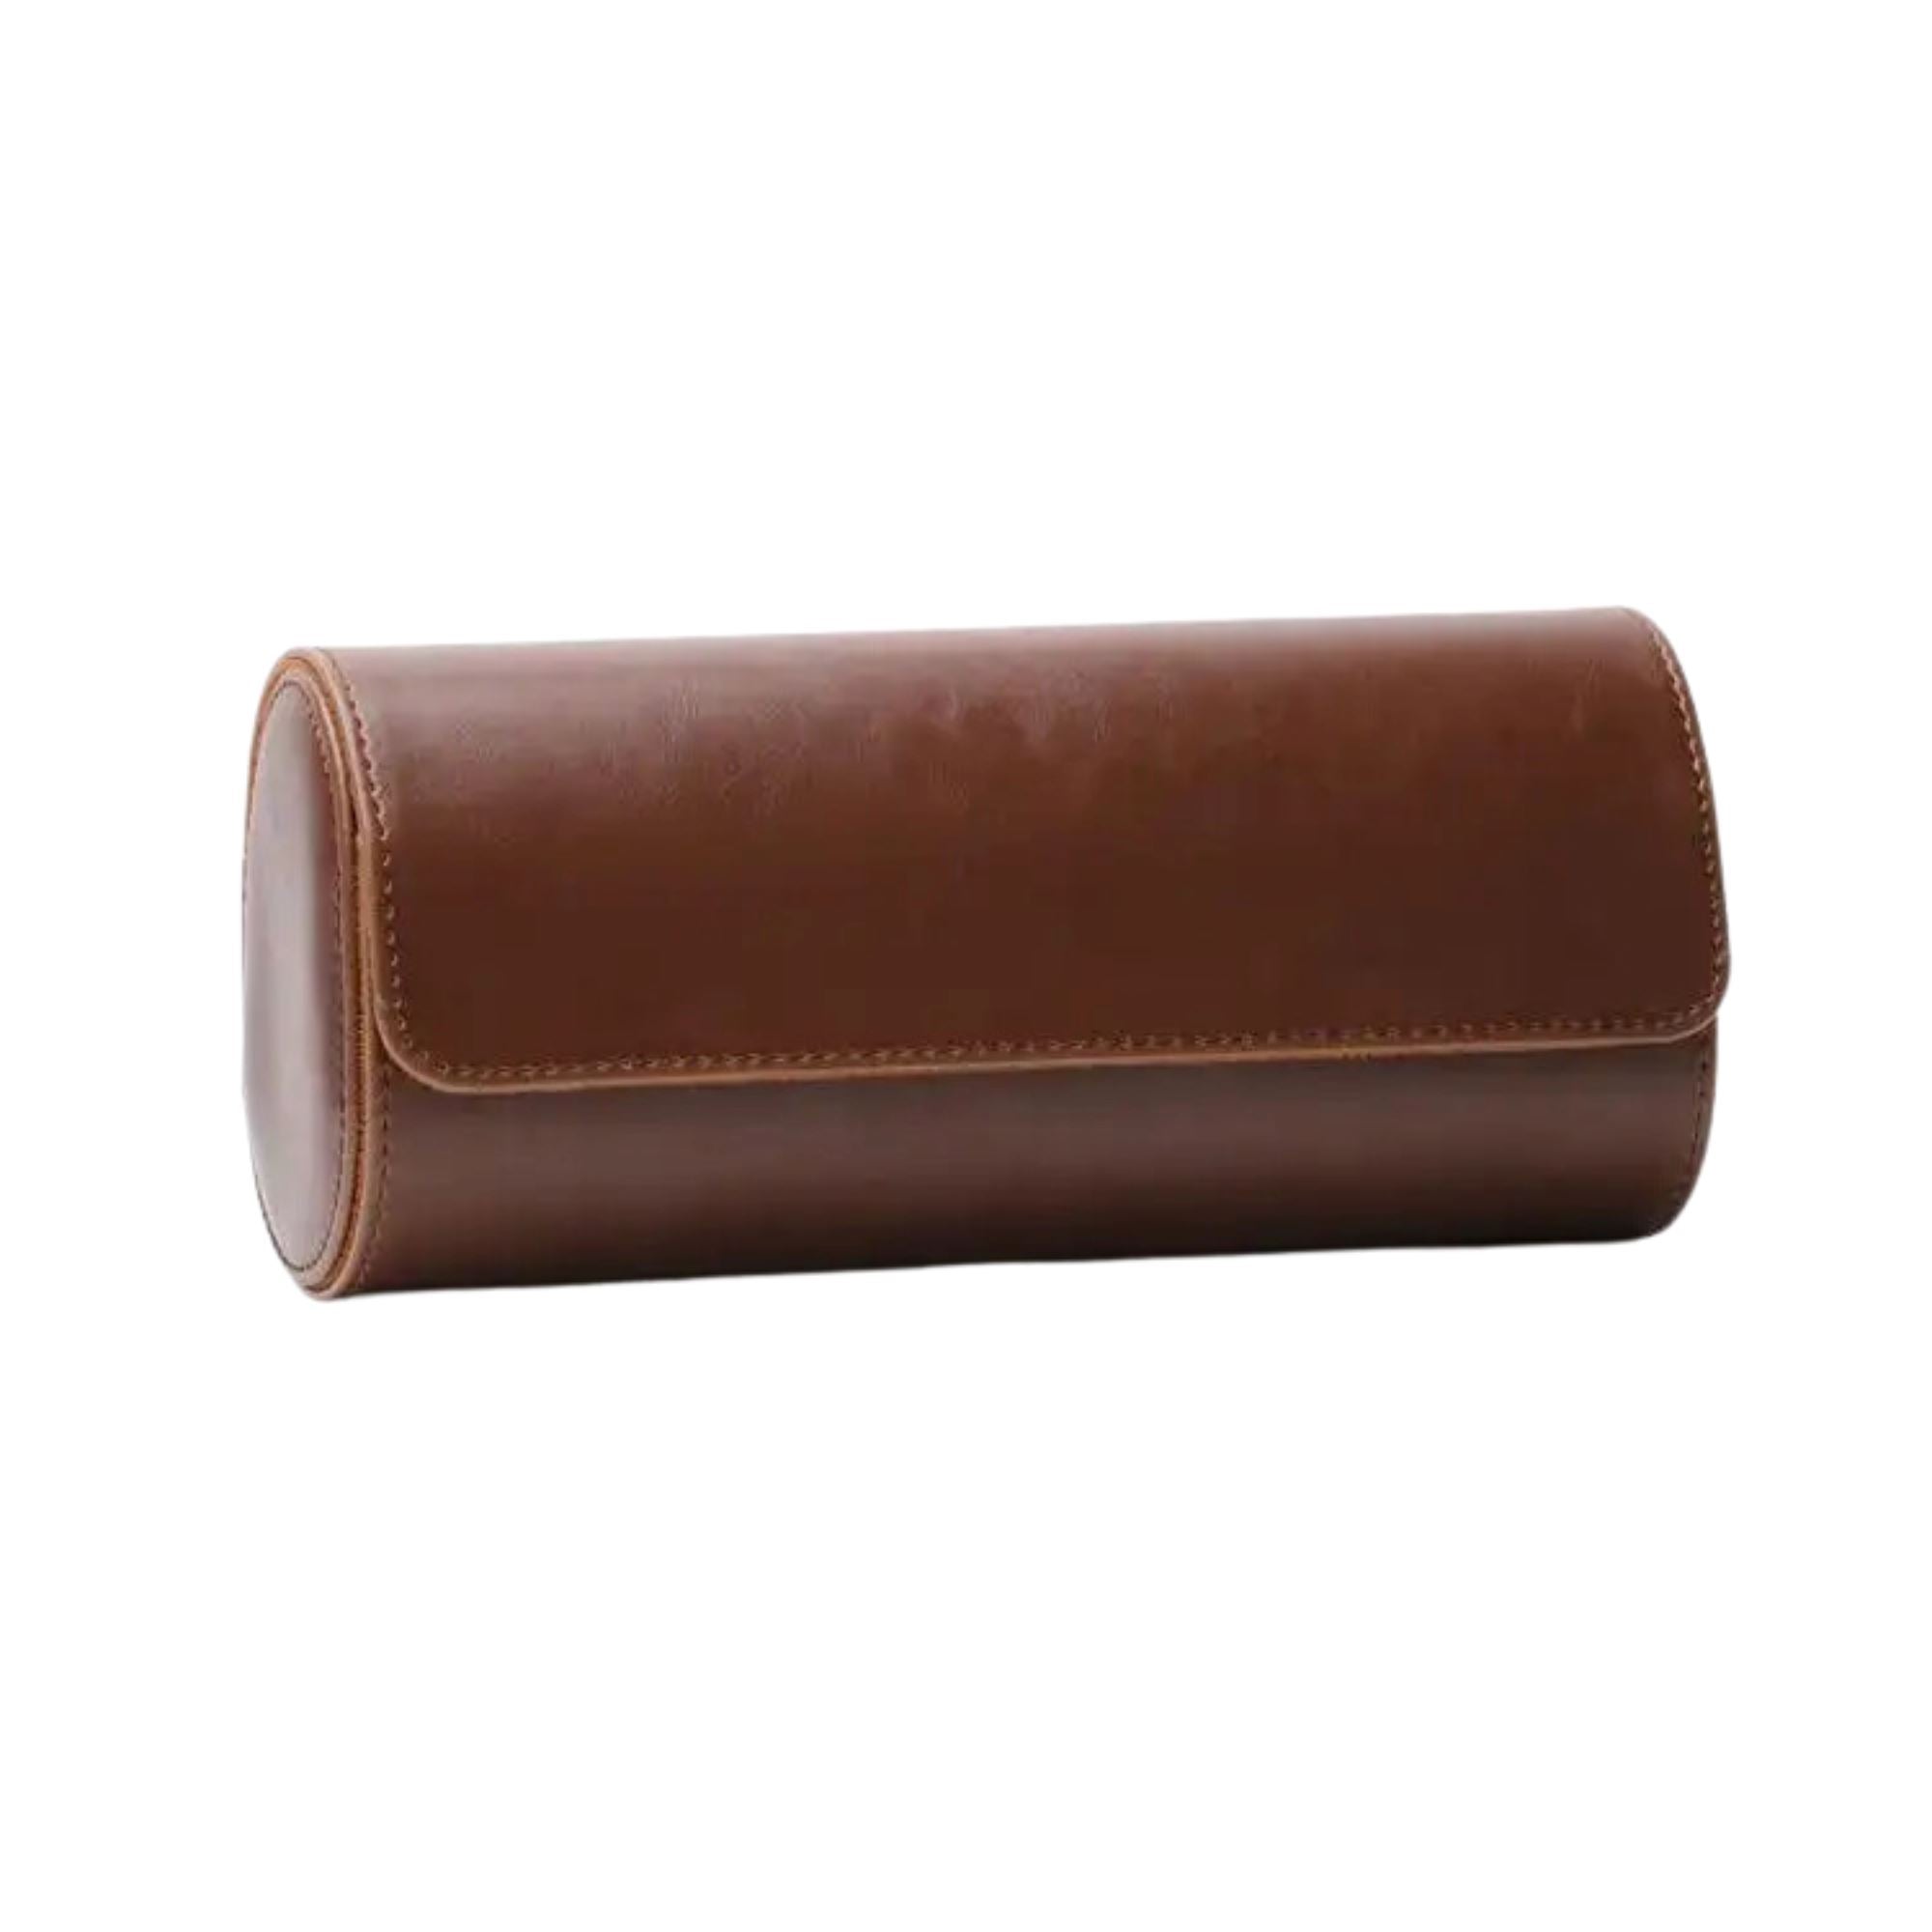 Watch Roll Case for 3 in Brown Vegan Leather Watch Boxes Clinks 